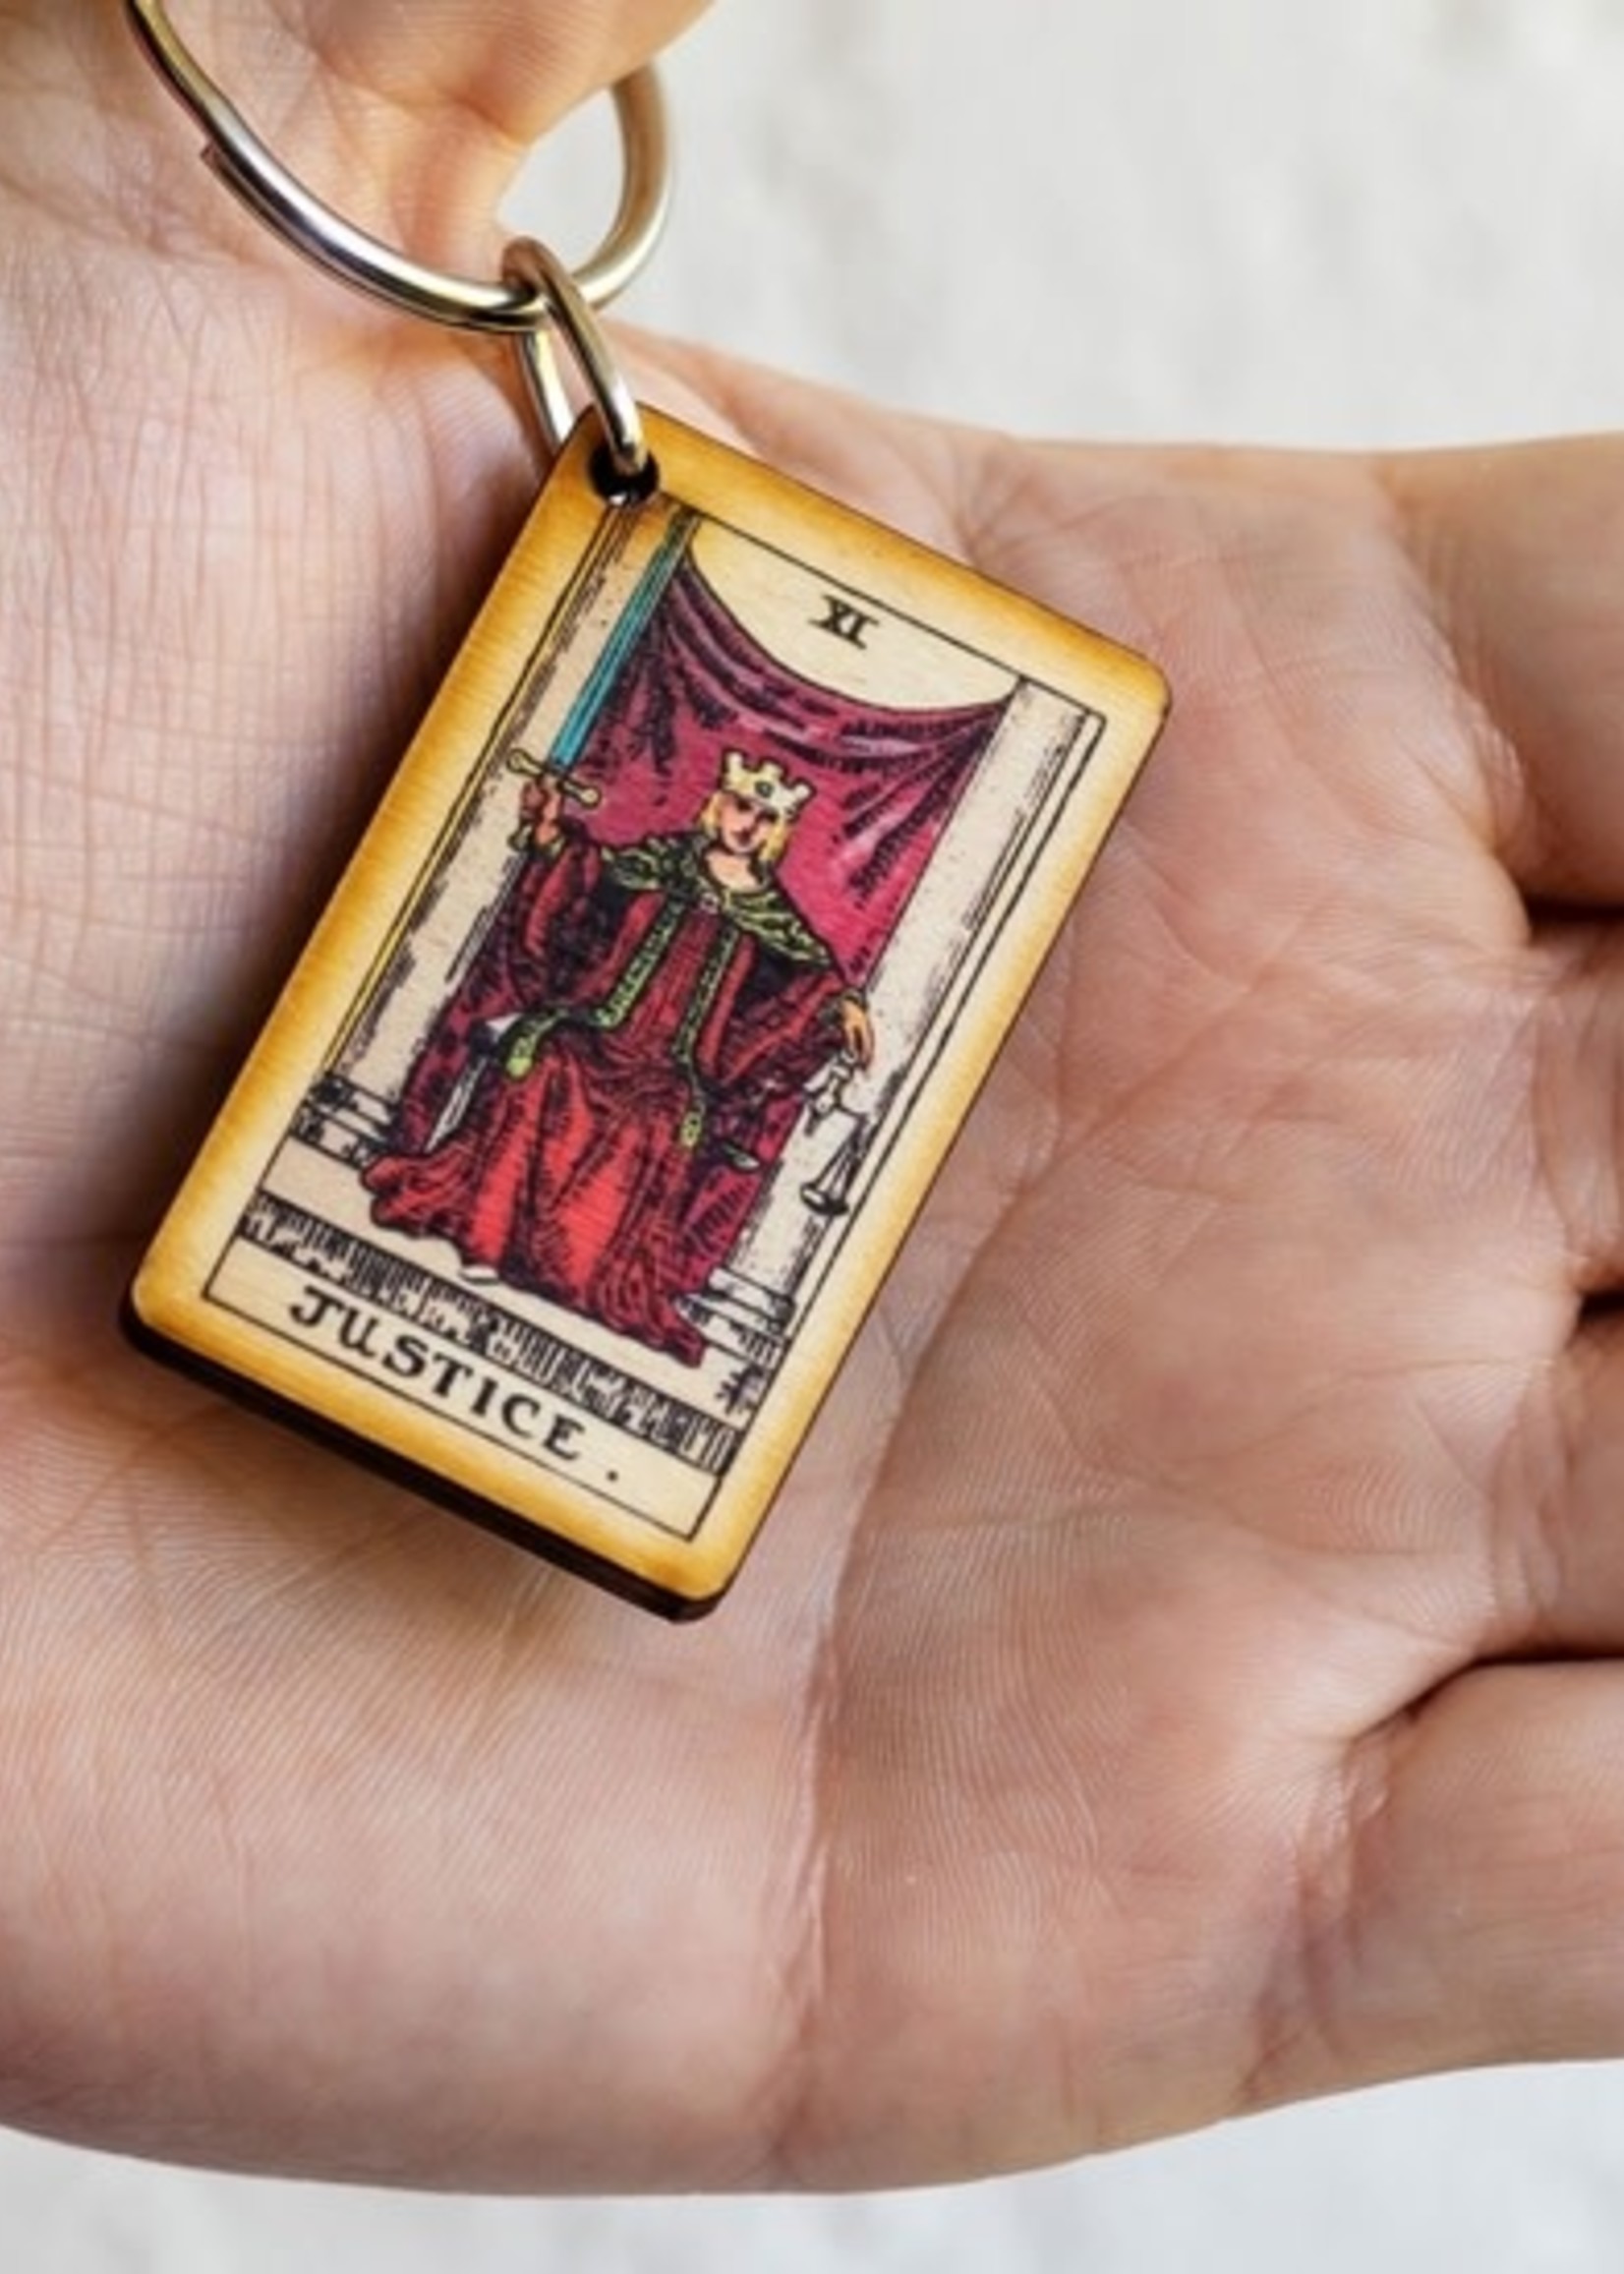 Most Amazing Tarot - 11 - Justice Wooden Keychain